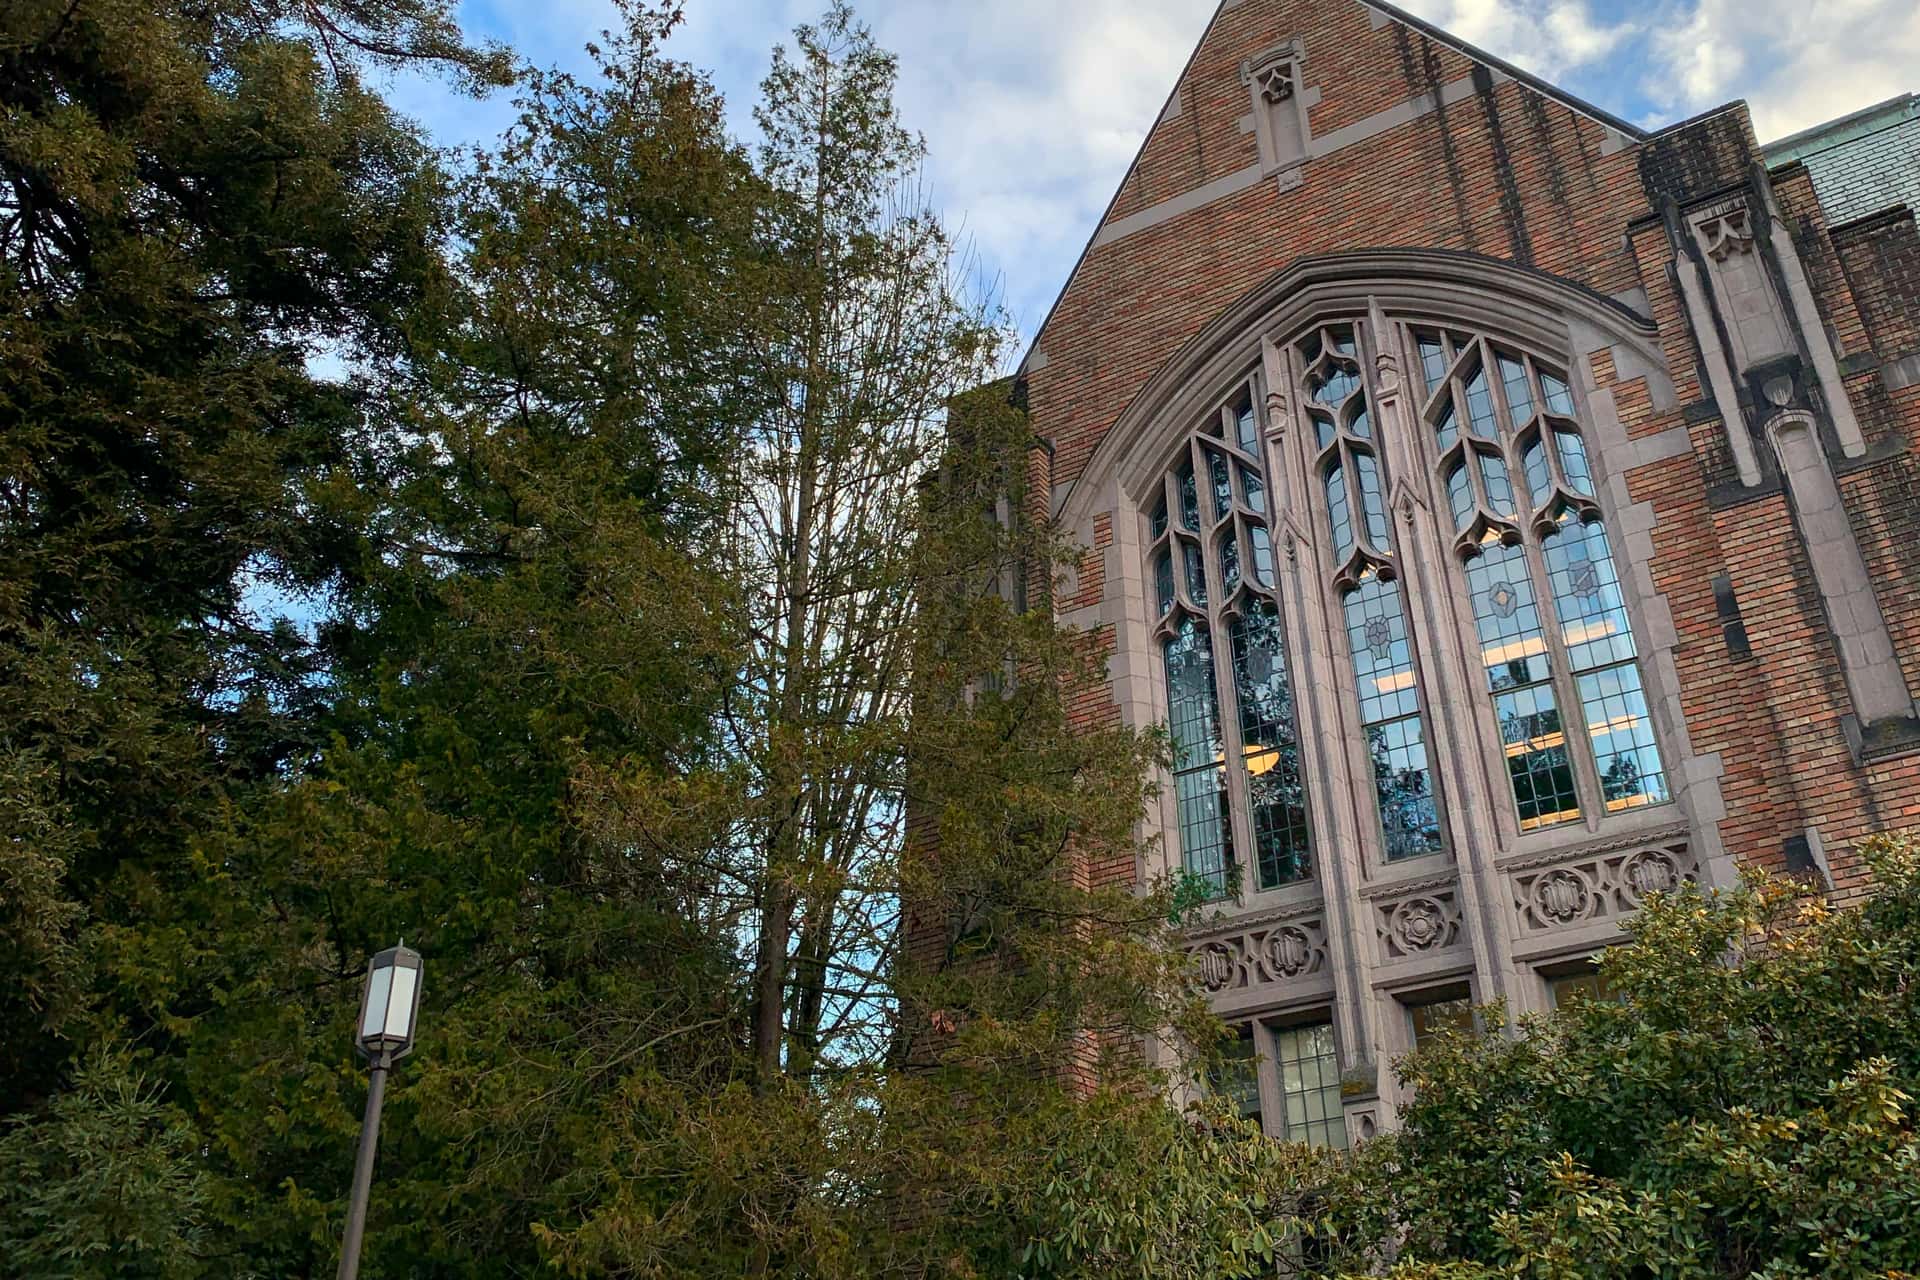 brick exterior of Anderson Hall with stained glass windows into a large room